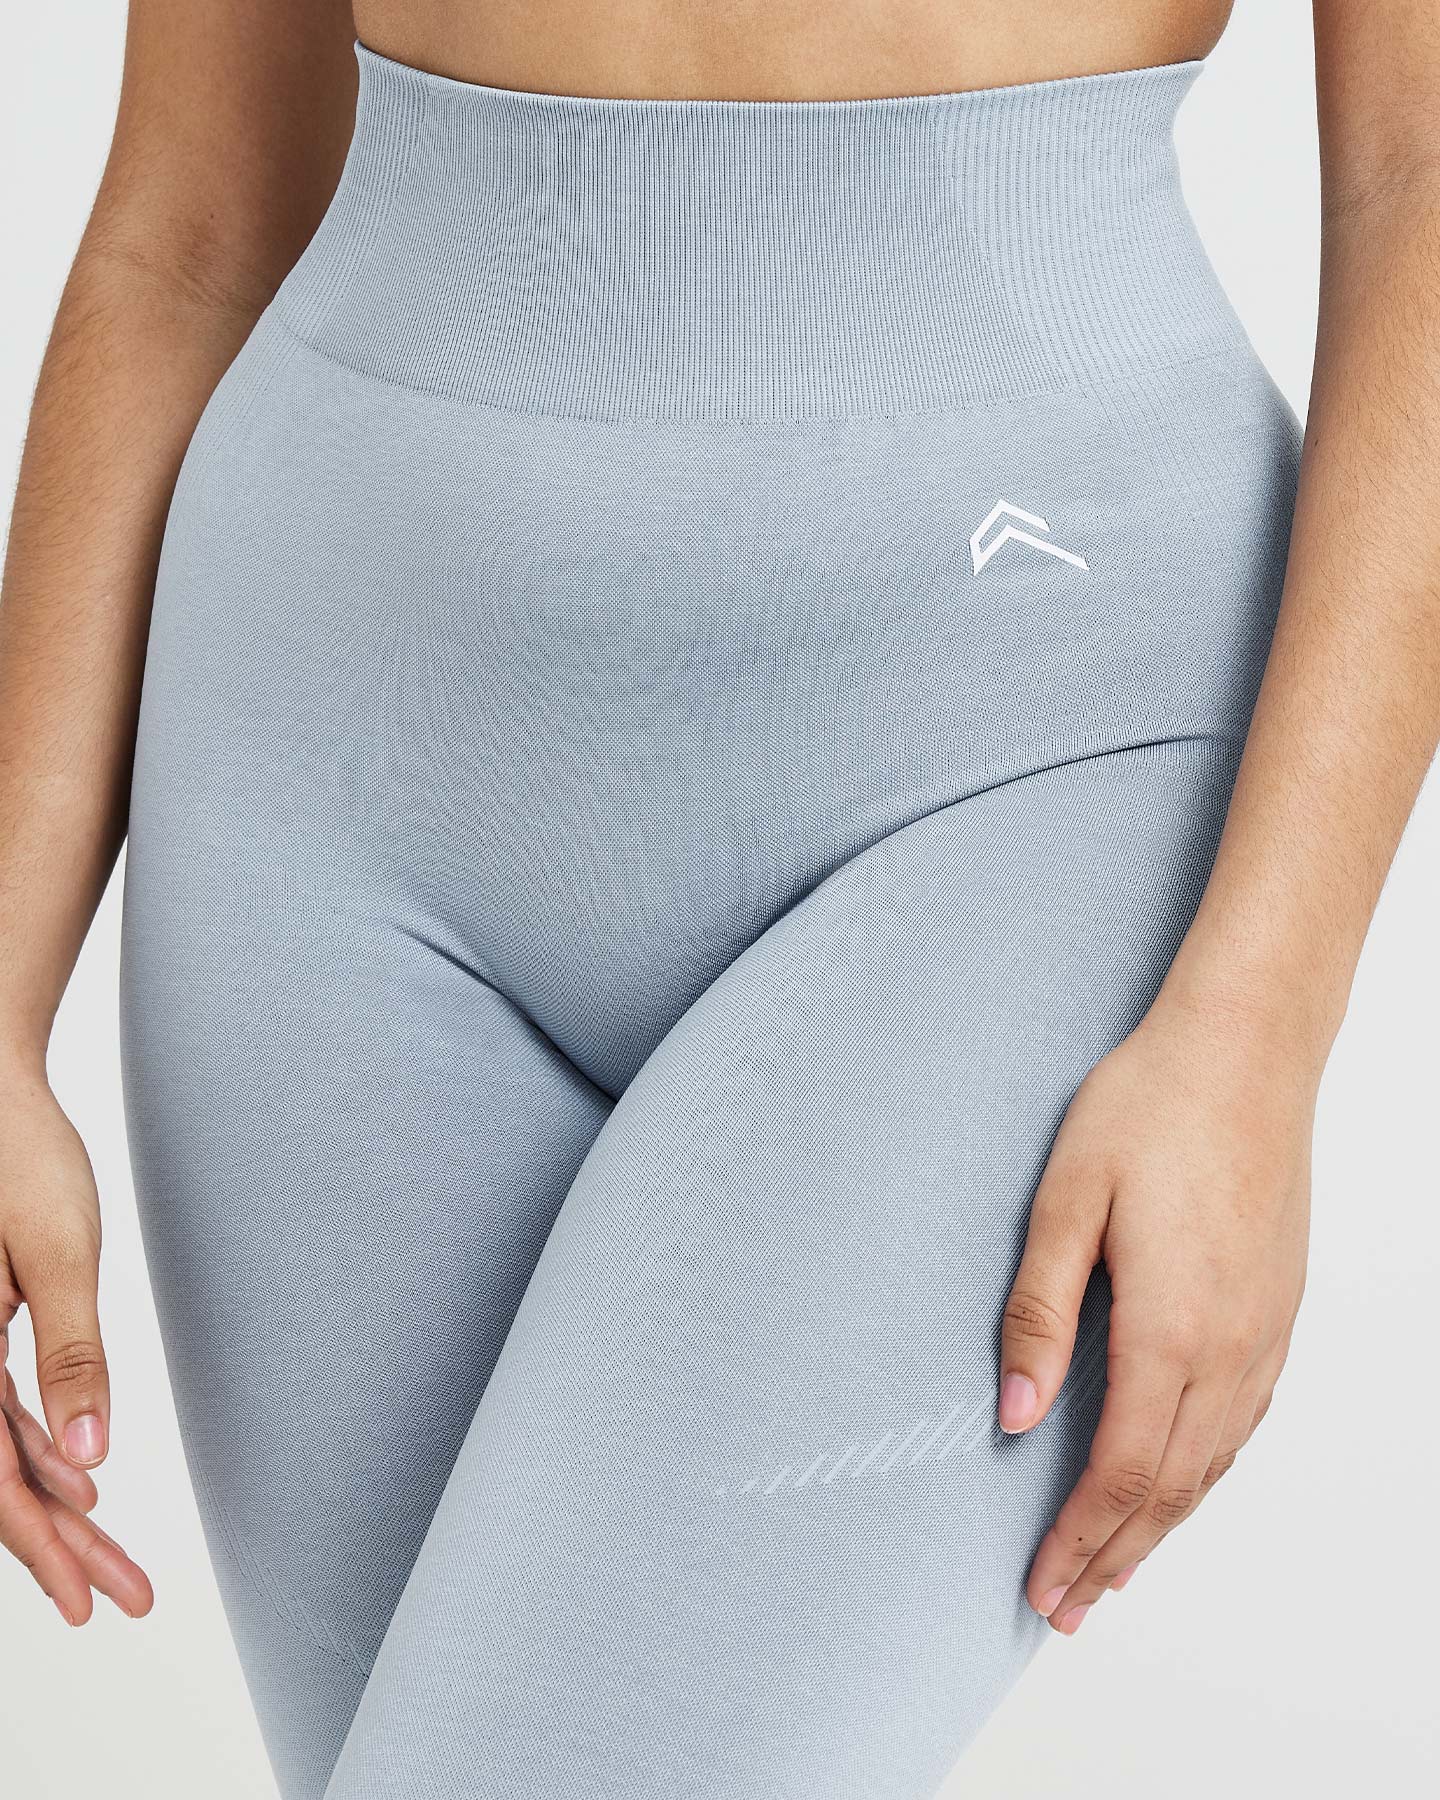 Sting Allure Grey Marle Seamless Leggings at FightHQ